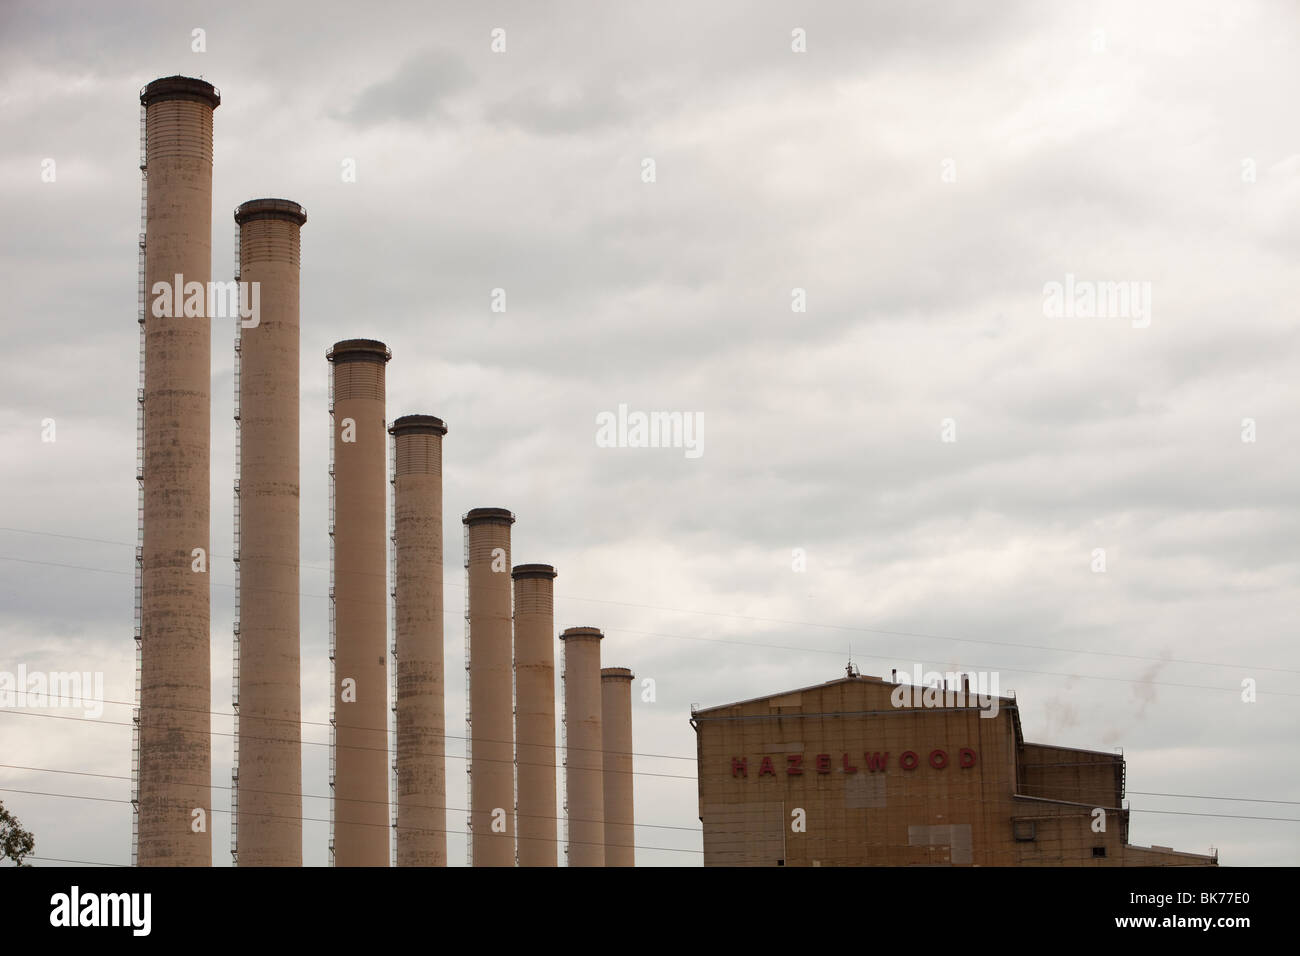 The Hazelwood coal fired power station in the Latrobe Valley, Victoria, Australia,which is trialling carbon capture and storage. Stock Photo